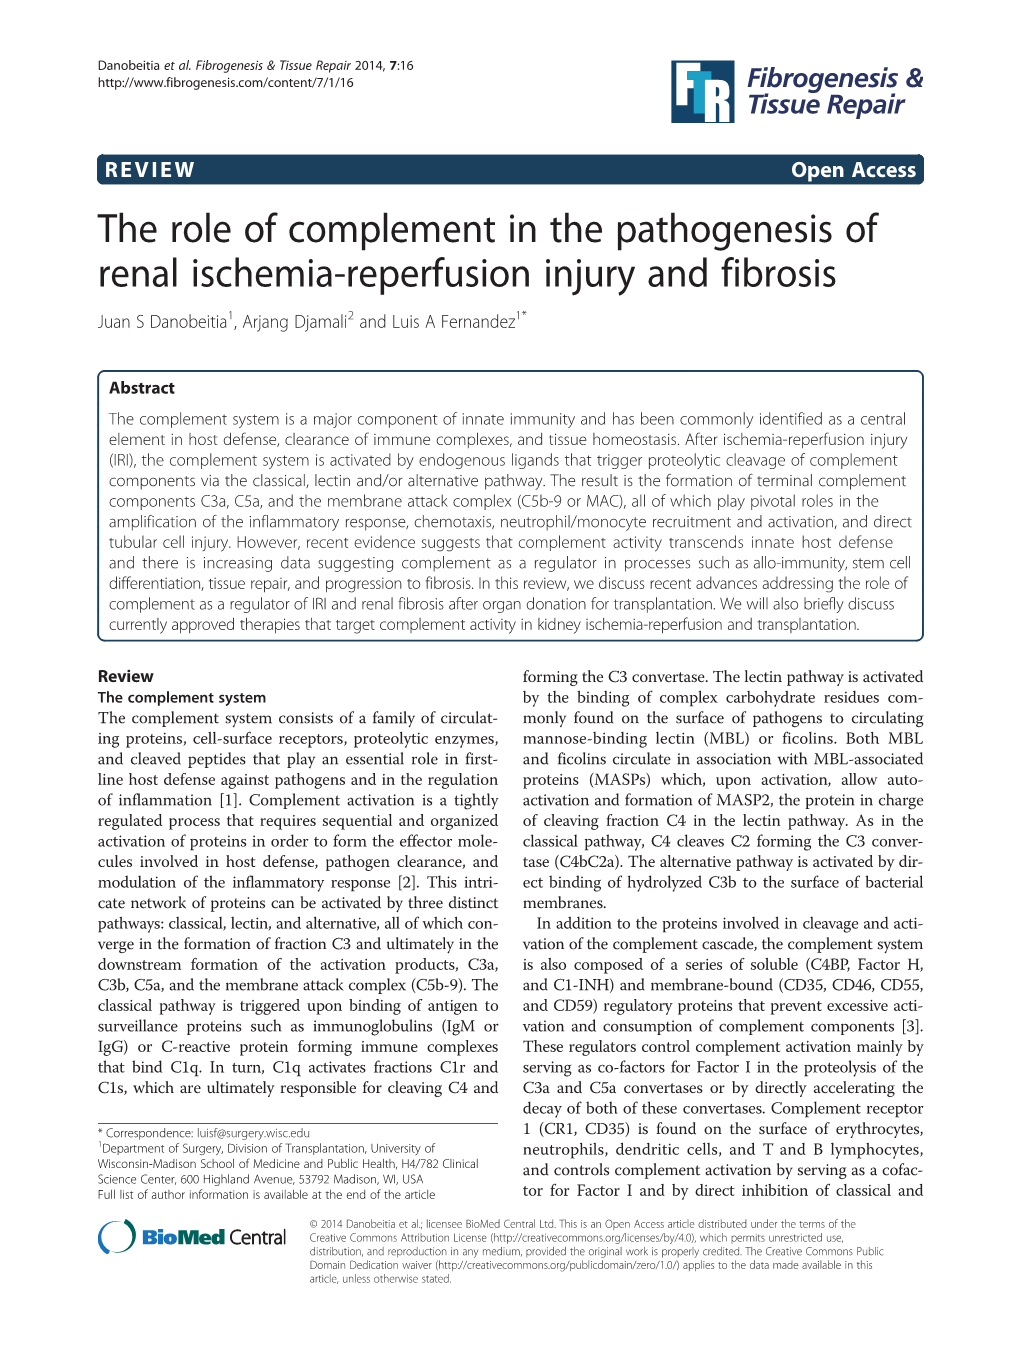 The Role of Complement in the Pathogenesis of Renal Ischemia-Reperfusion Injury and Fibrosis Juan S Danobeitia1, Arjang Djamali2 and Luis a Fernandez1*